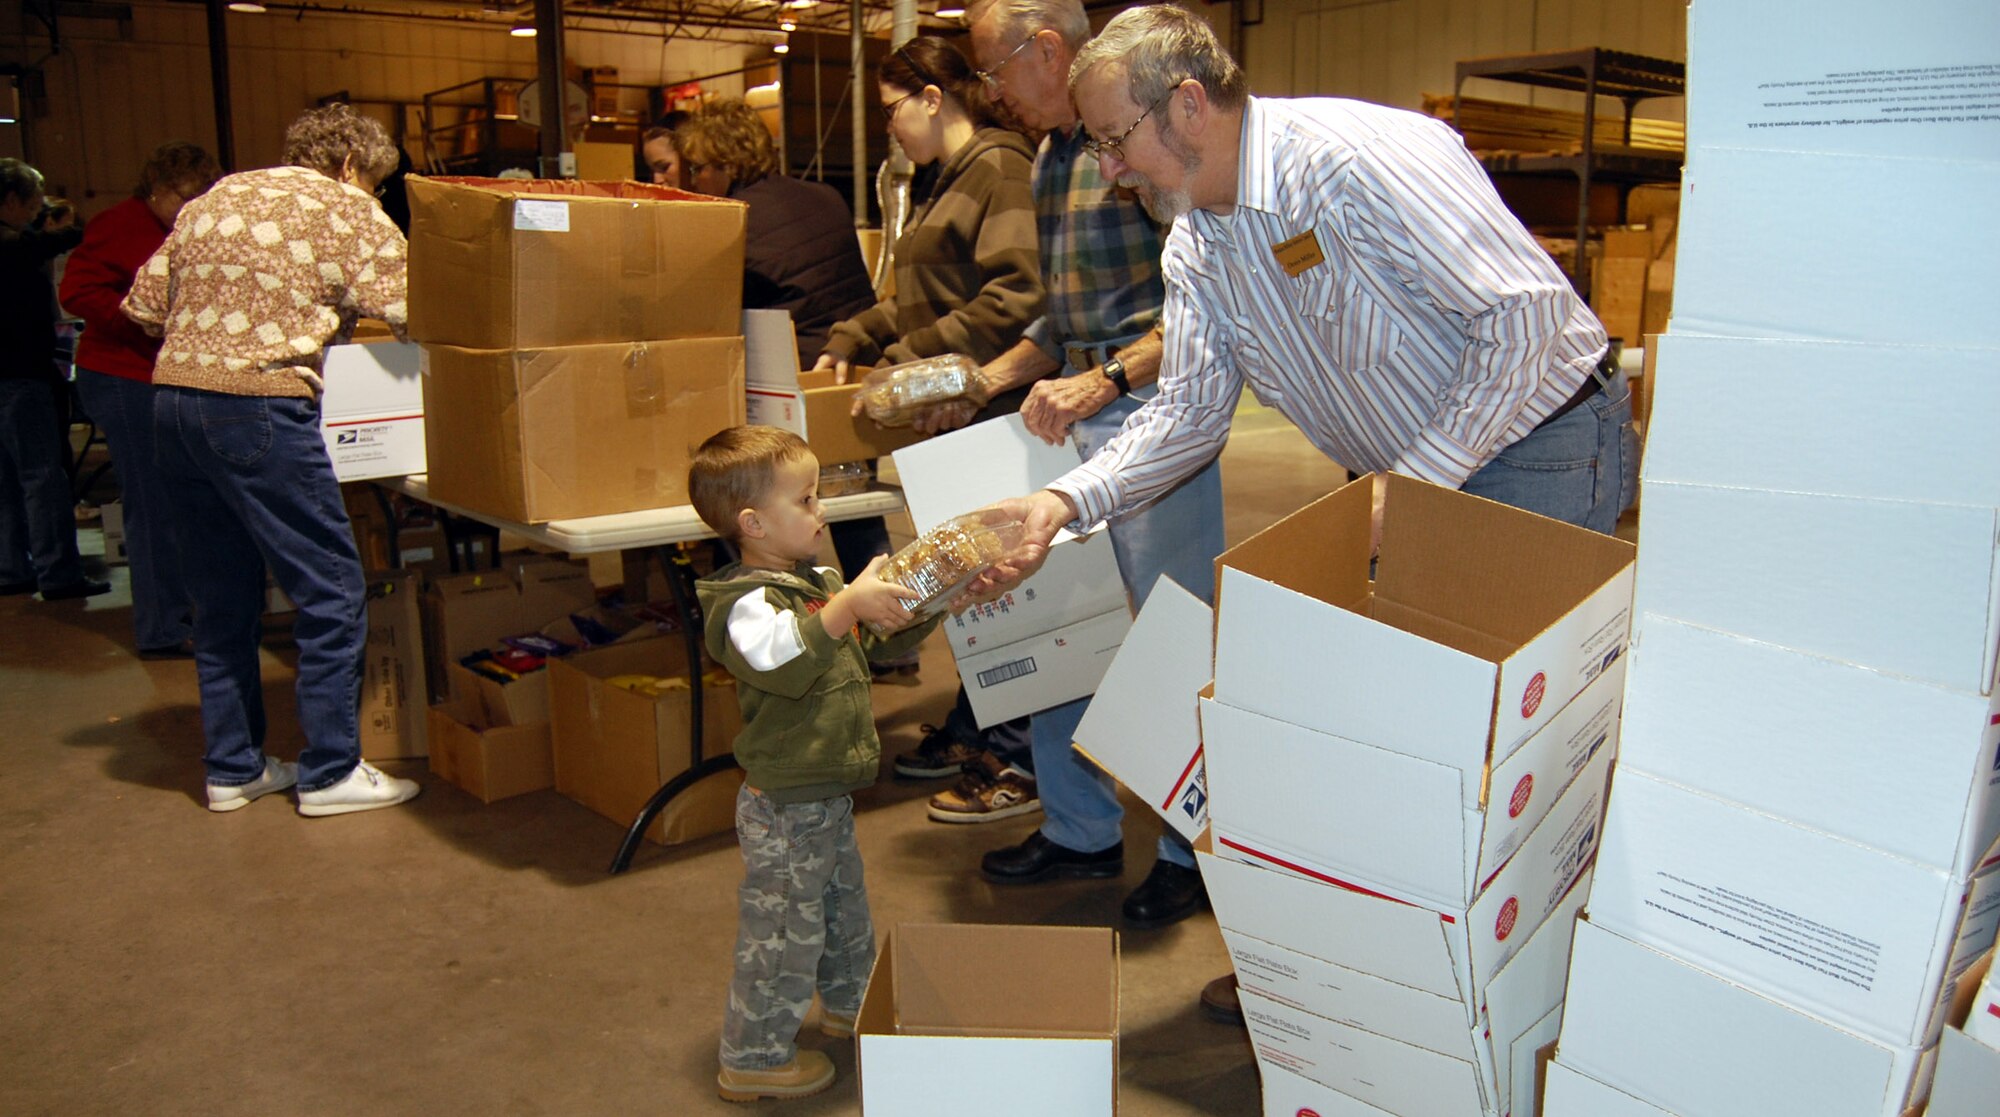 Little Warrior David, 3, hands Retiree Council member Denis Miller a package of homemade cookies Dec. 6 during the final phase of the 10th Annual Operation Happy Holidays. Volunteers and organizers packed more than 200 boxes and shipped them the same day. (U.S. Air Force photo/Valerie Mullett)